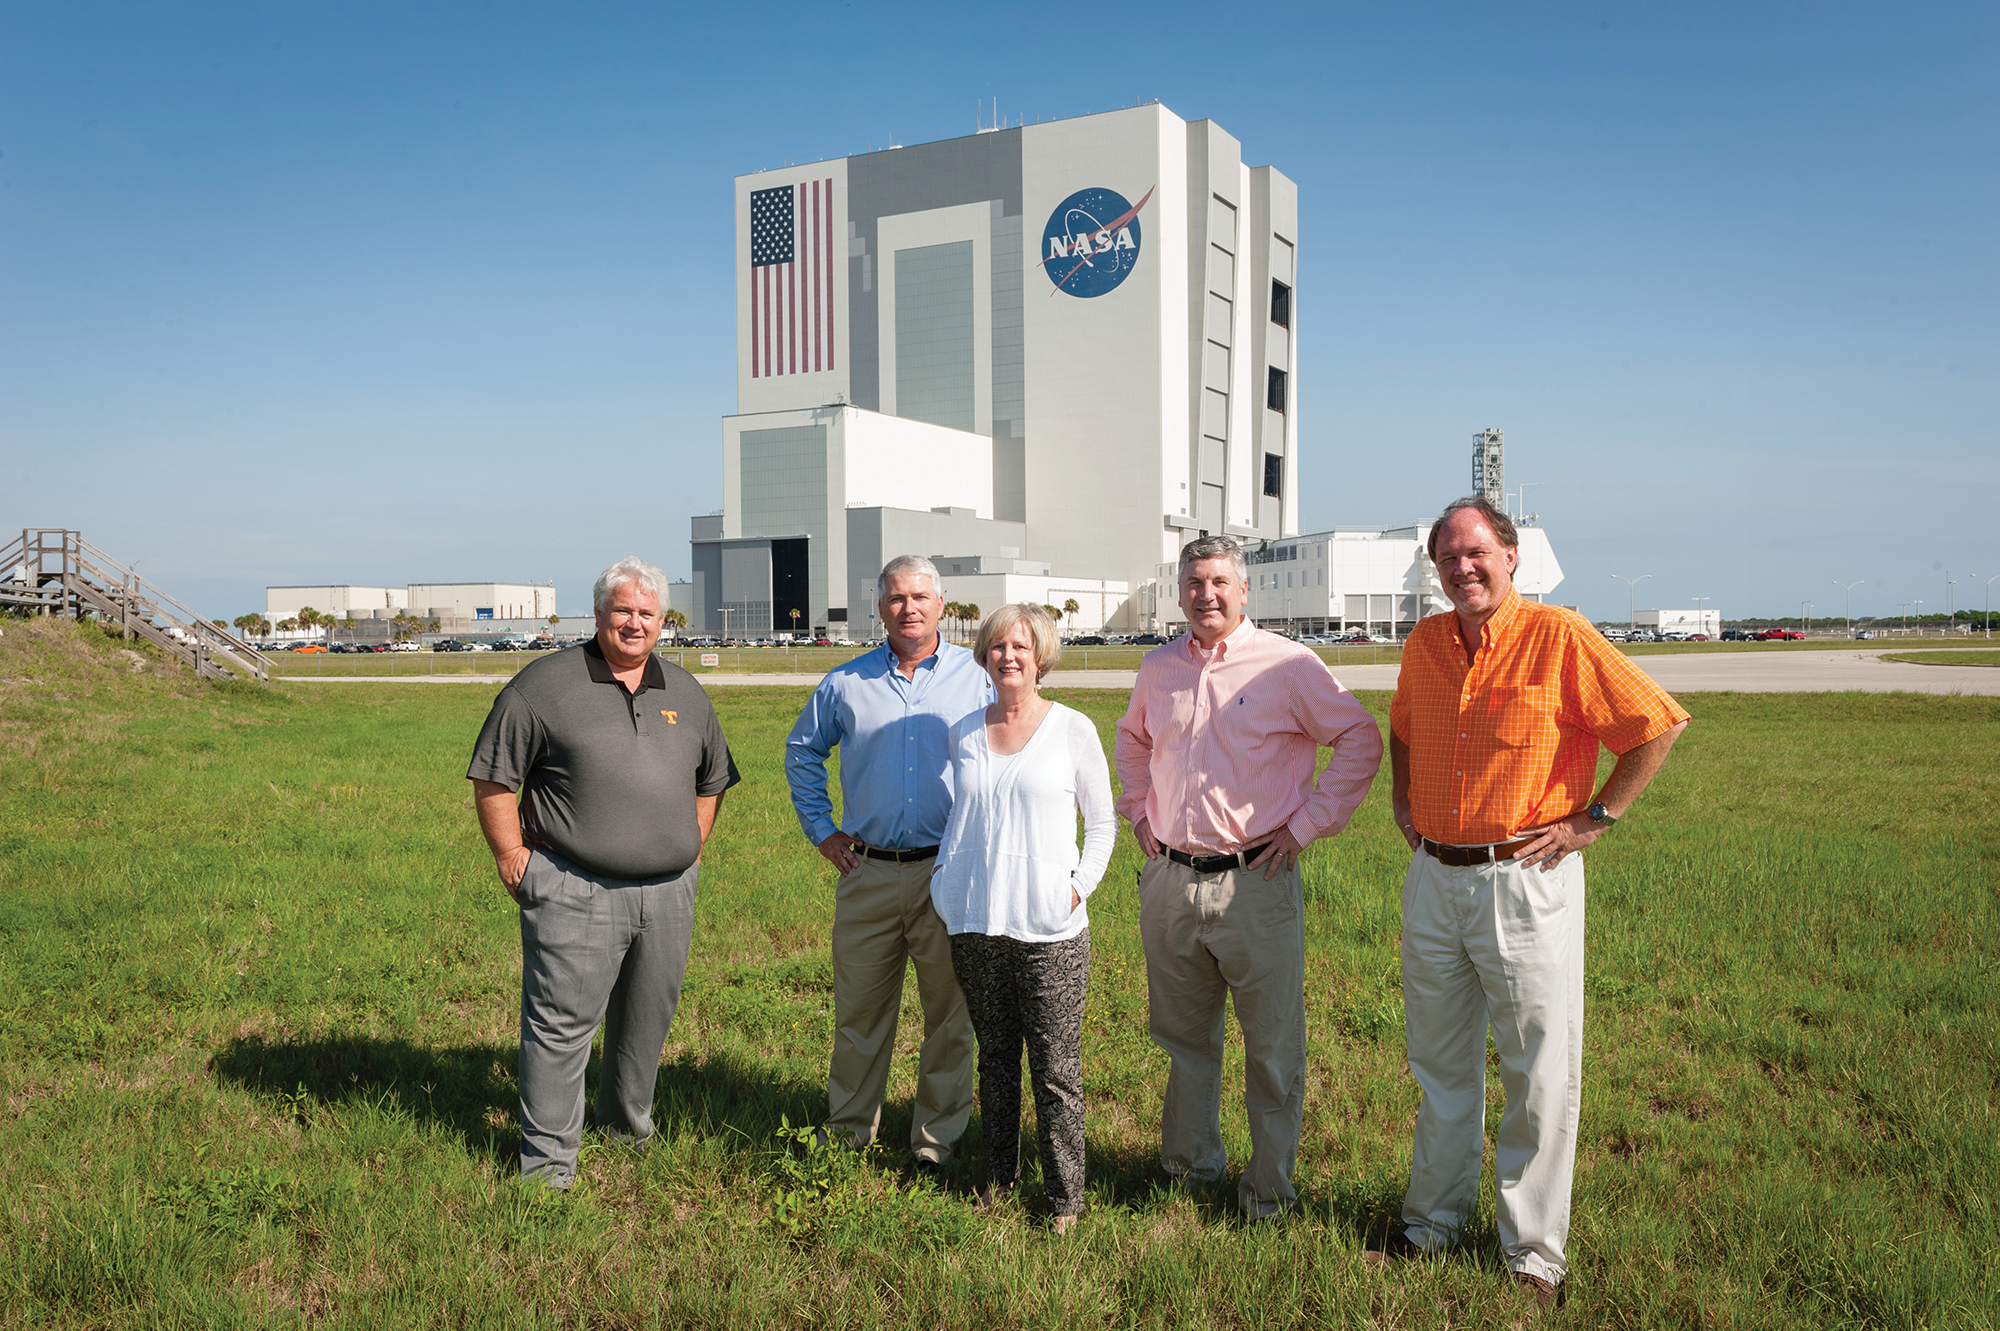 Group of five alumni stand in front of Kennedy Space Center